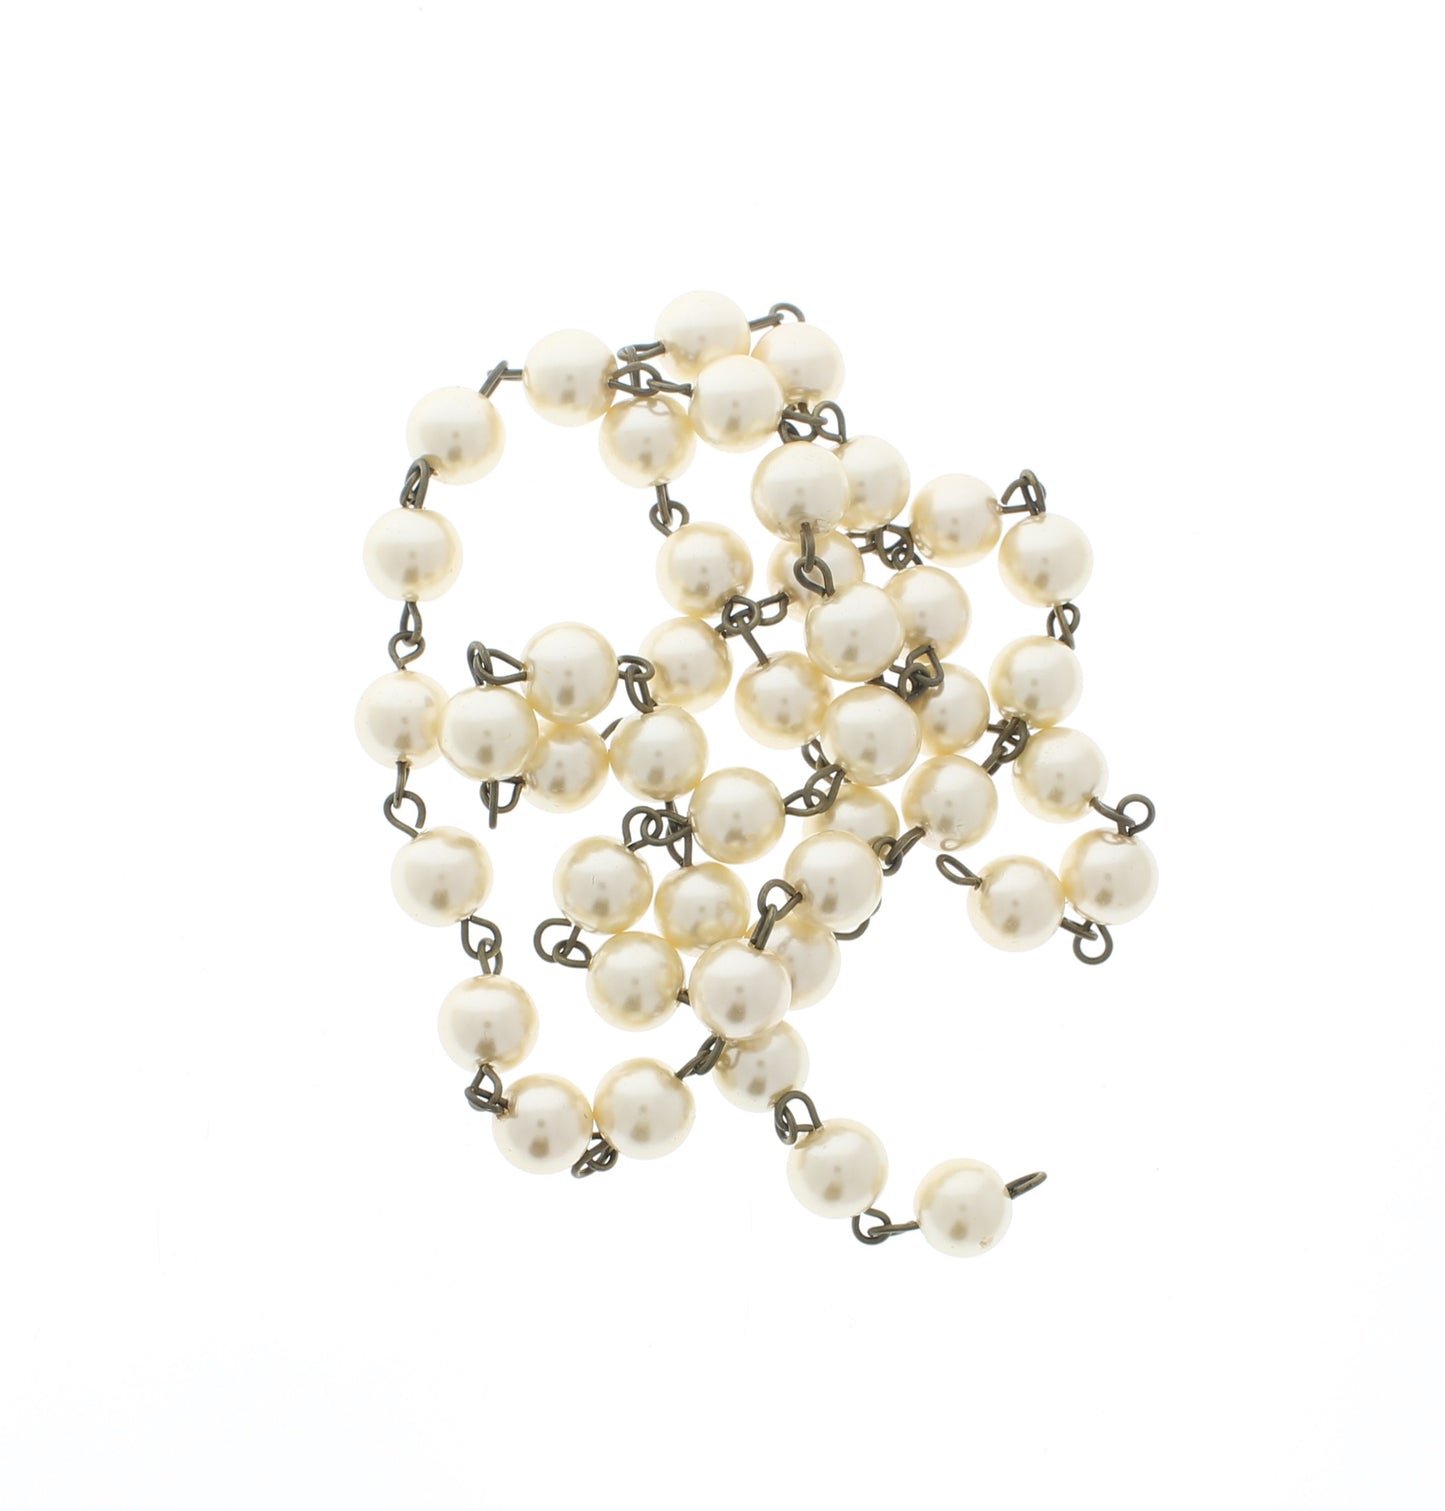 8mm White Glass Linked Chain, Sold by Foot